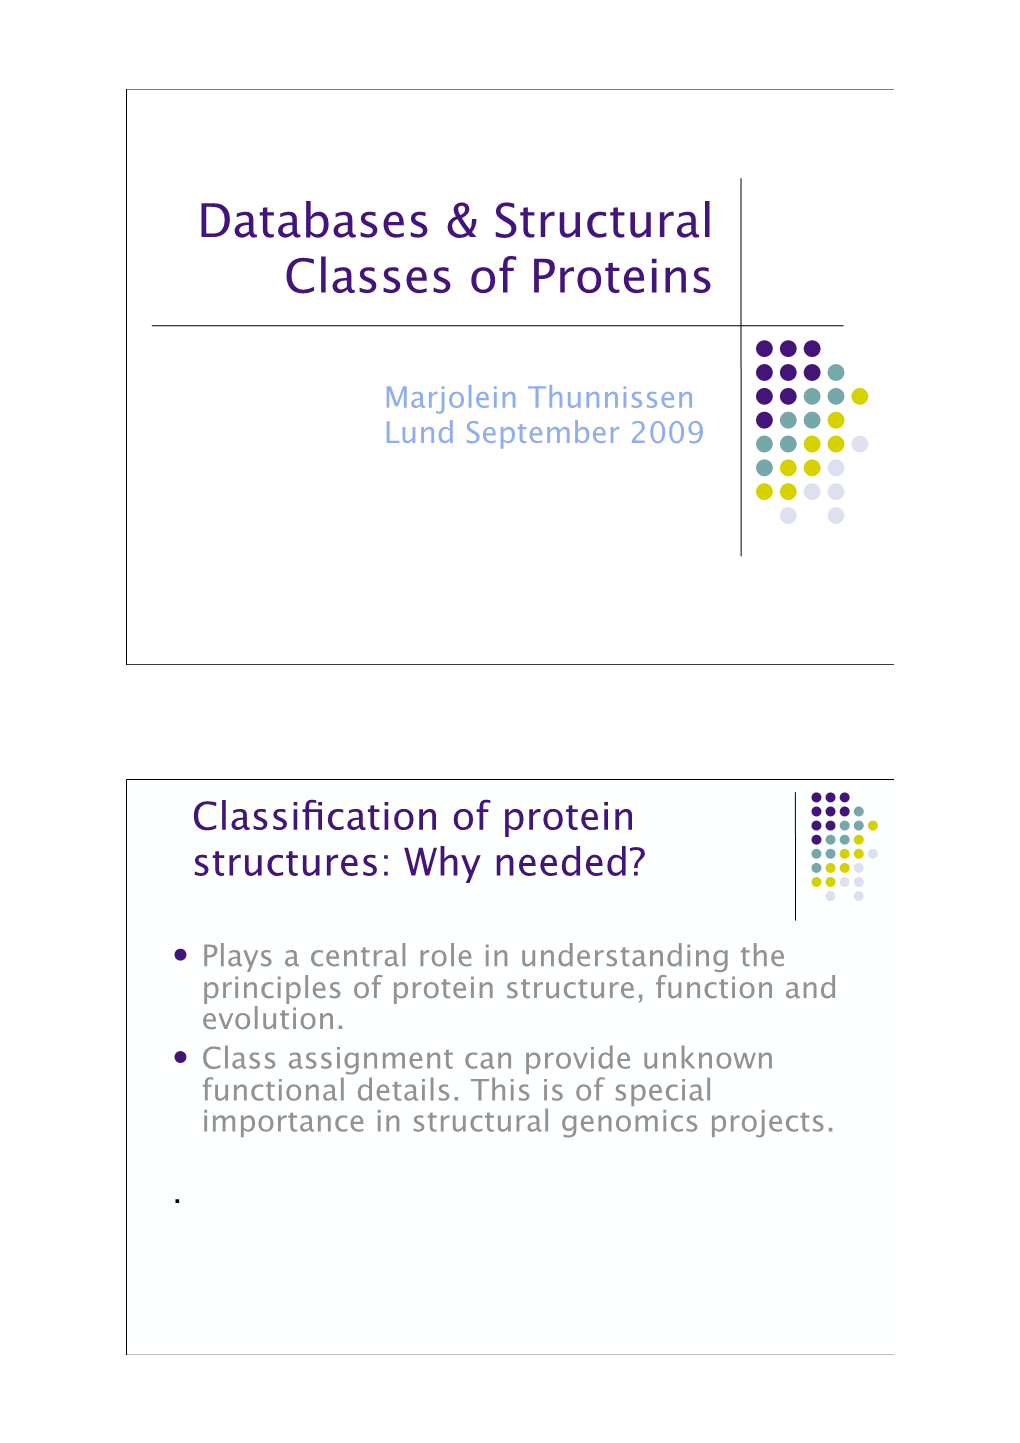 Databases & Structural Classes of Proteins